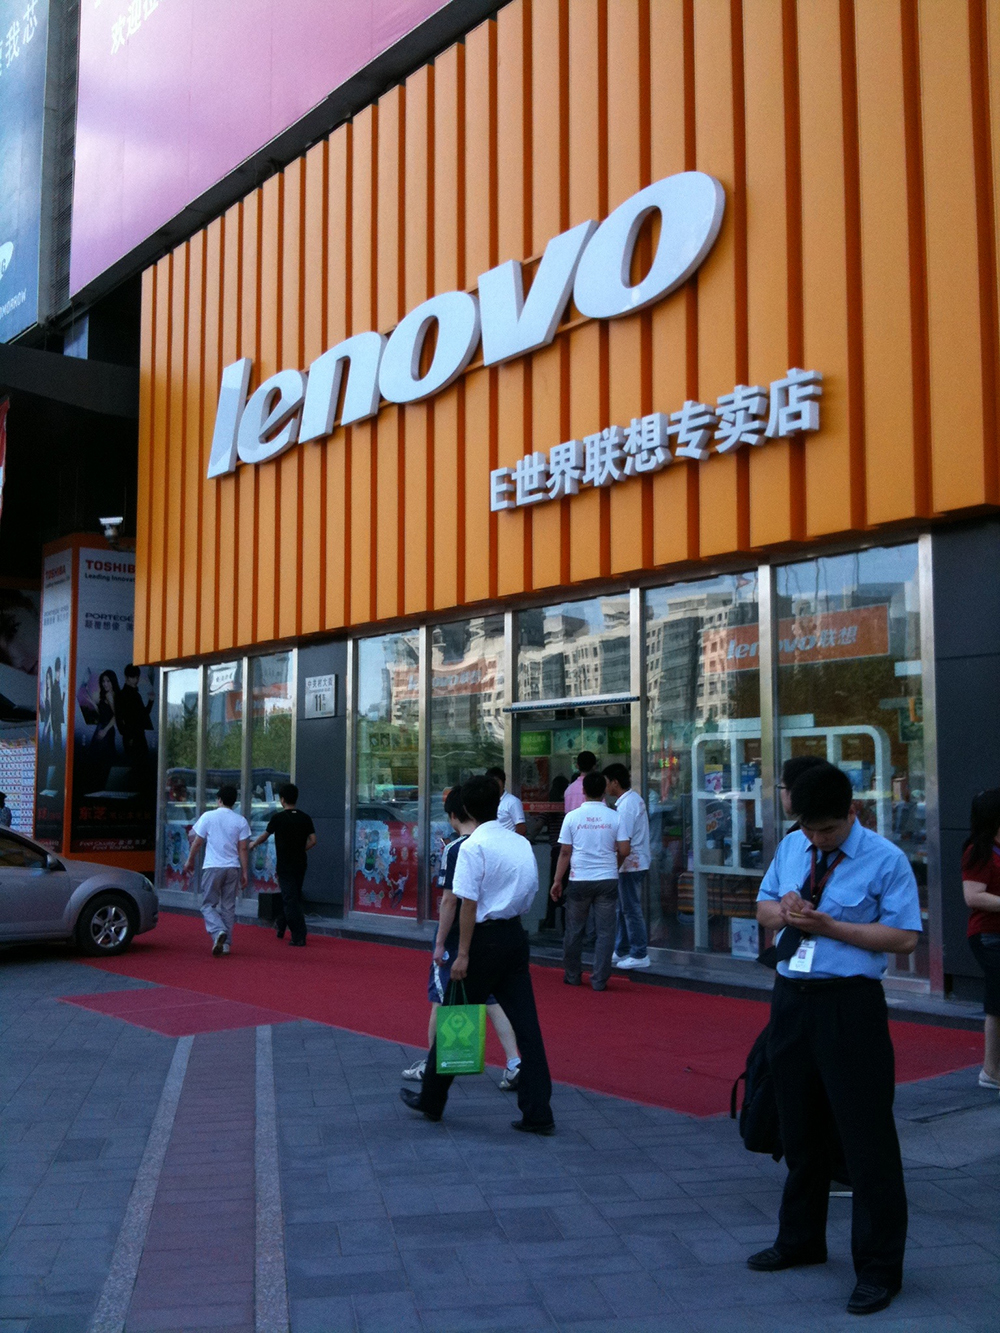 Lenovo, the Chinese PC powerhouse, opened its North American headquarters in North Carolina’s Triangle in 2005. Last year, Lenovo shipped slightly fewer than 16 million PCs, about 240,000 more than Apple.